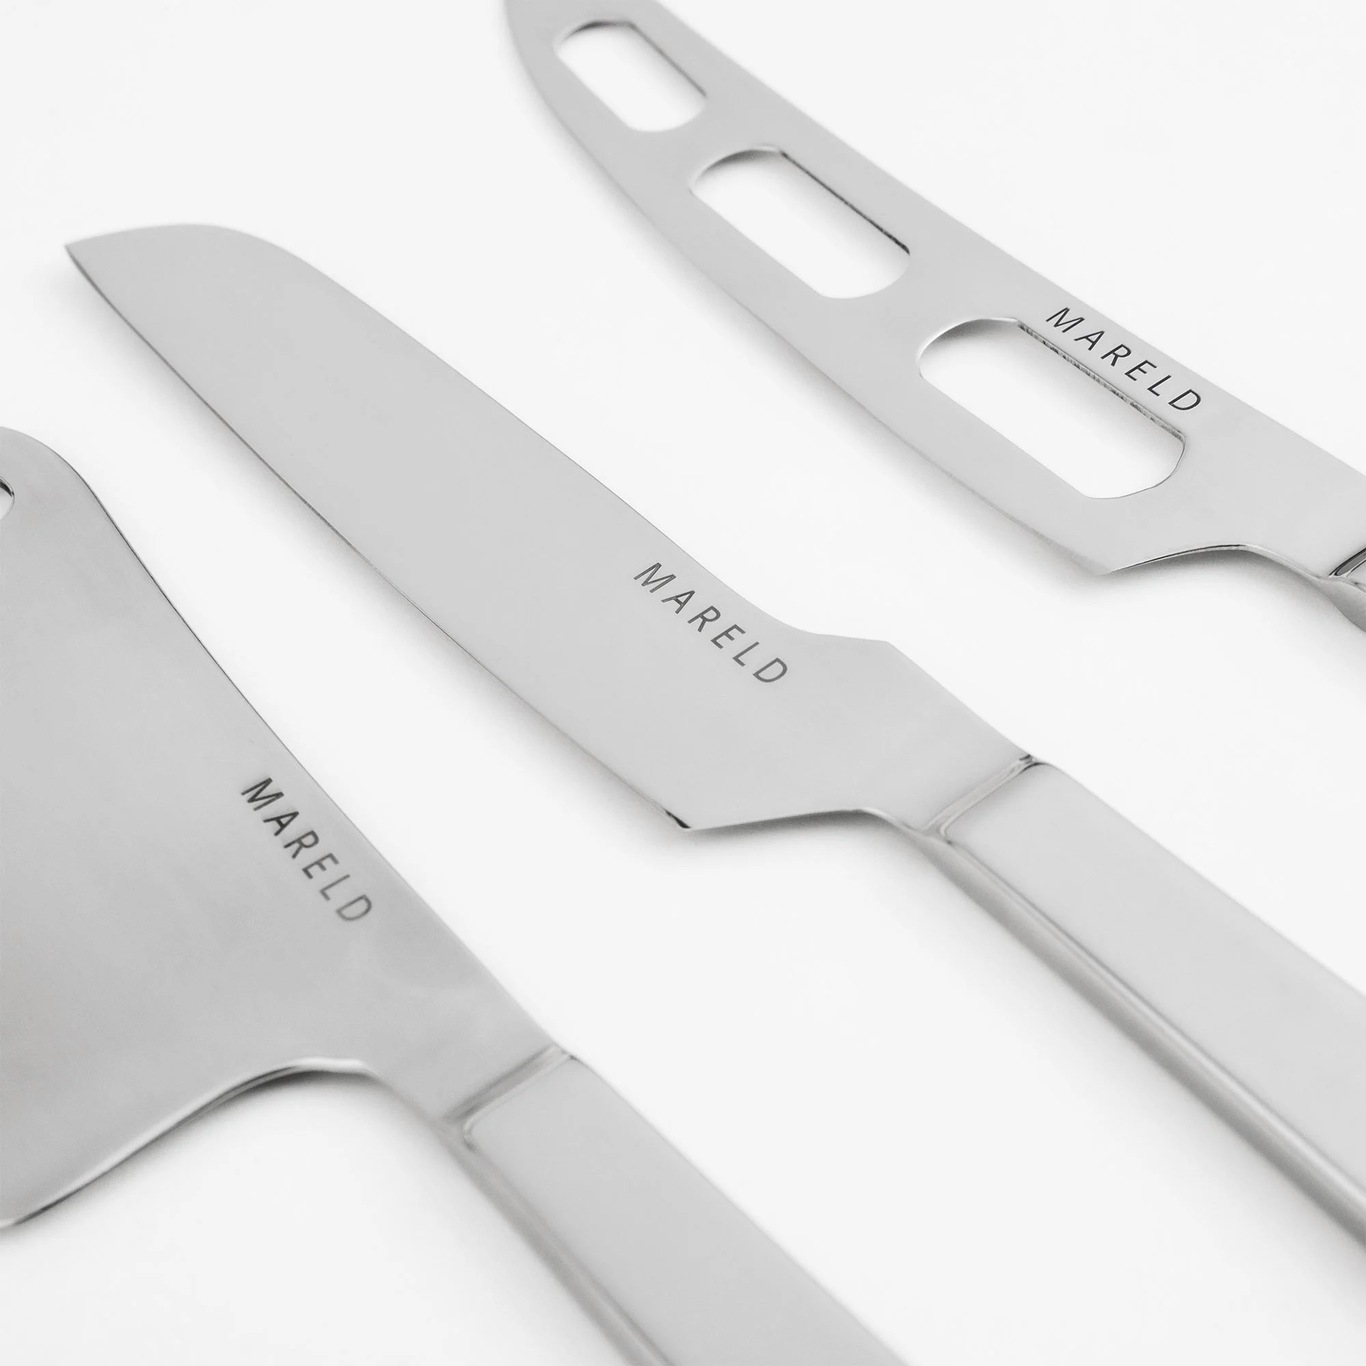 Score This Cuisinart Knife Set While It's 40% Off at